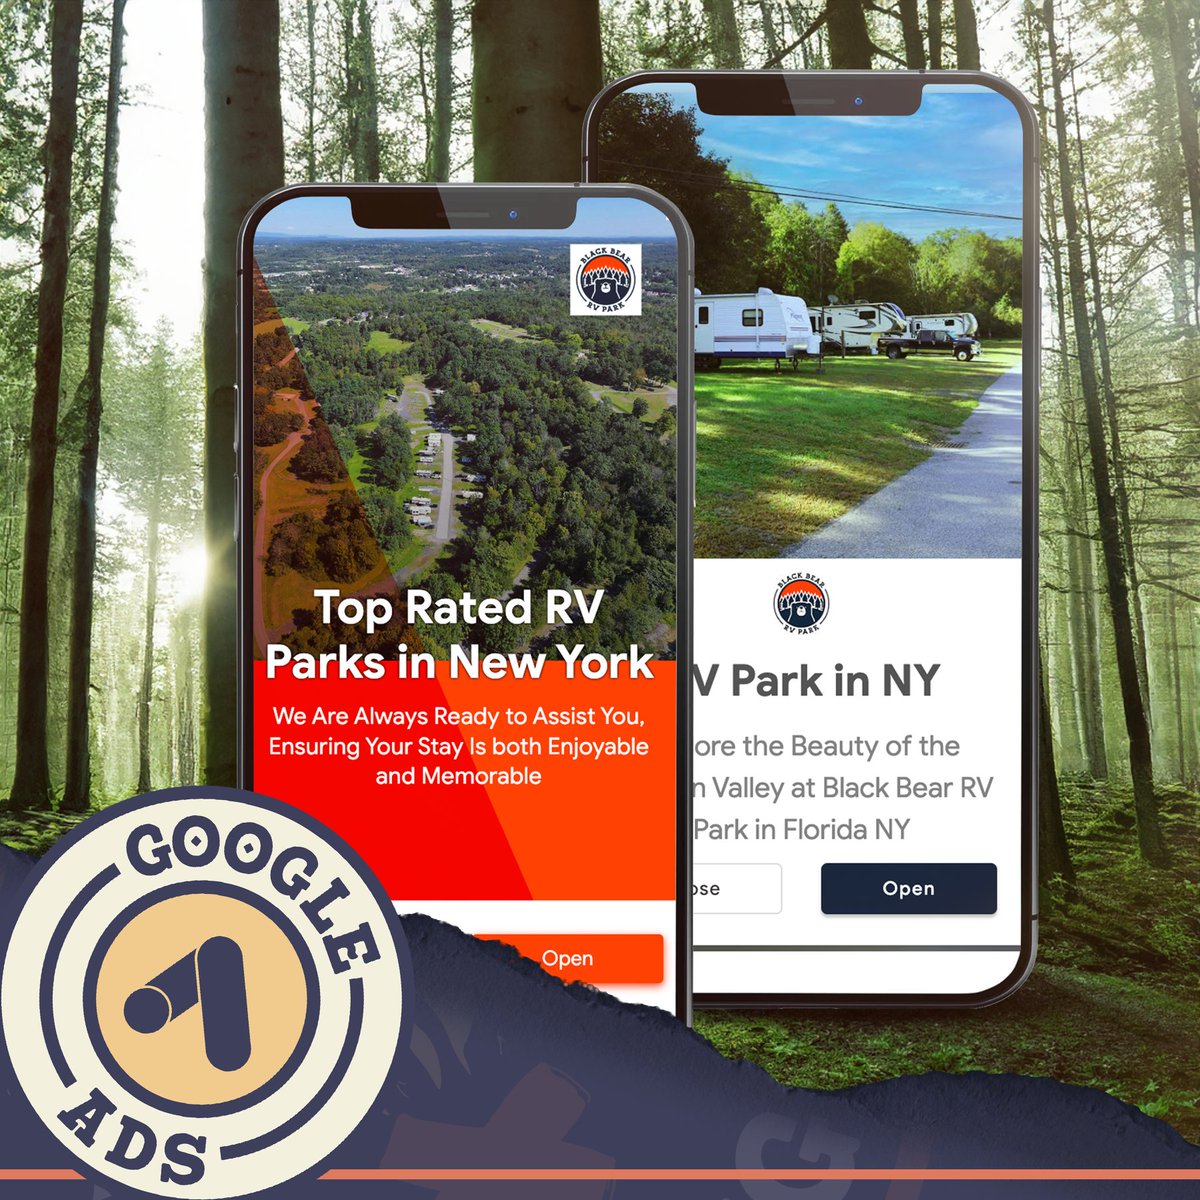 Make it easier for potential customers to find your campground with a certified Google Partner! 

#Kingwillycamping #camping #campgroundmarketing #custommarketing #campspot #campspotapi #api #googlepartner #GoogleAds